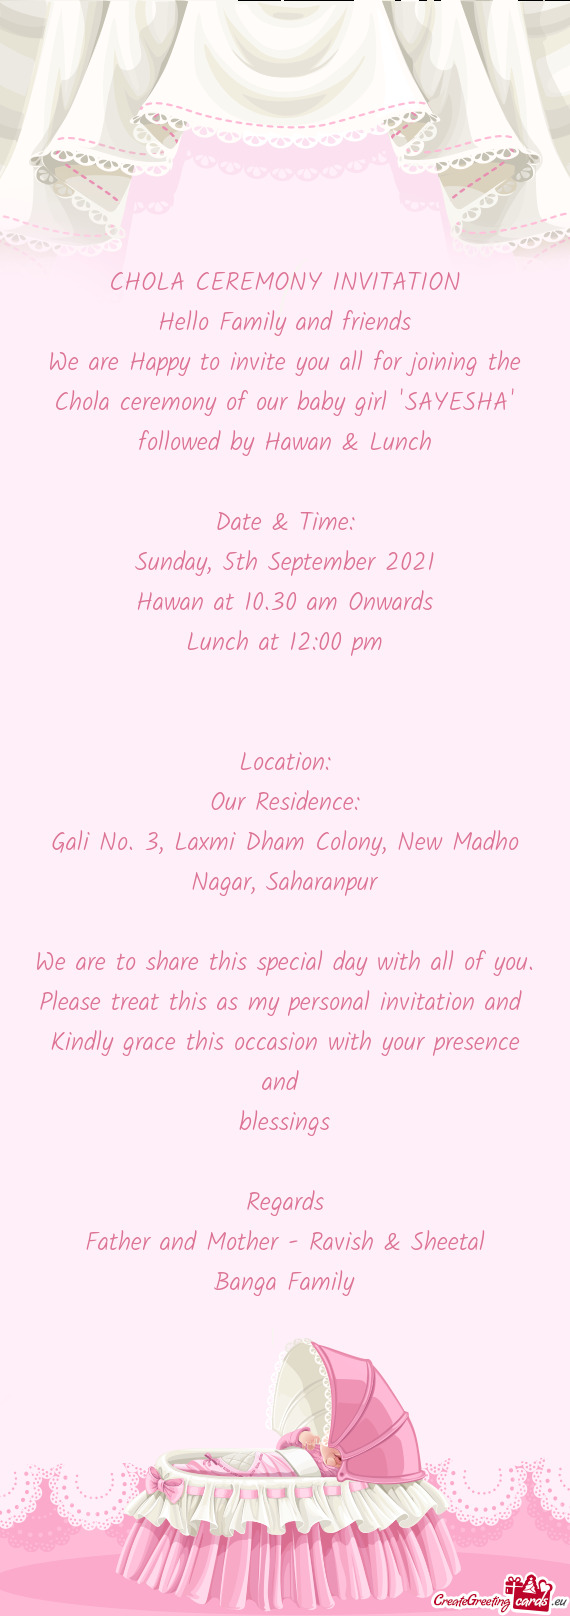 Chola ceremony of our baby girl "SAYESHA" followed by Hawan & Lunch